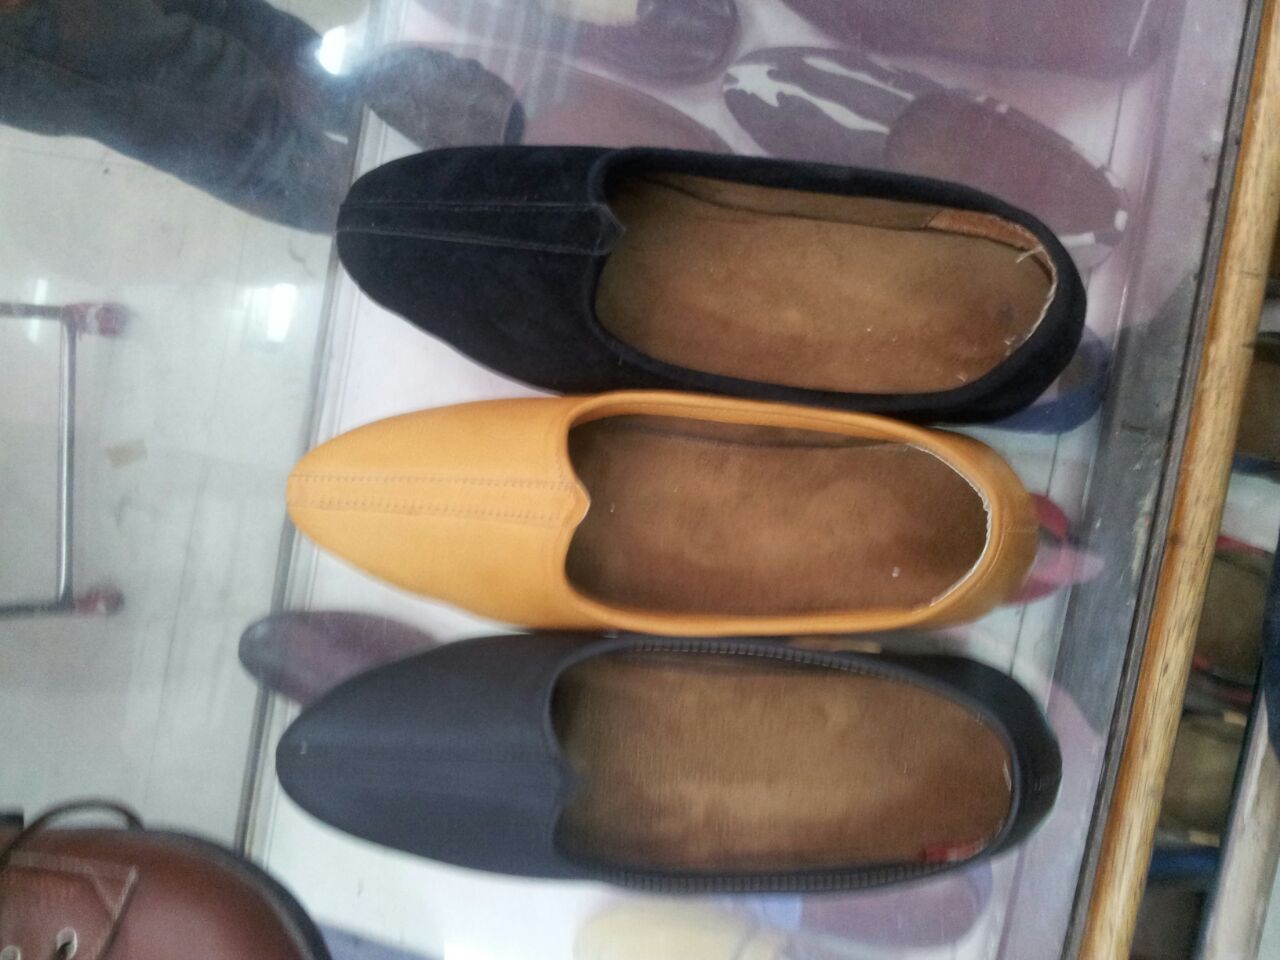 New indian shoee made it export